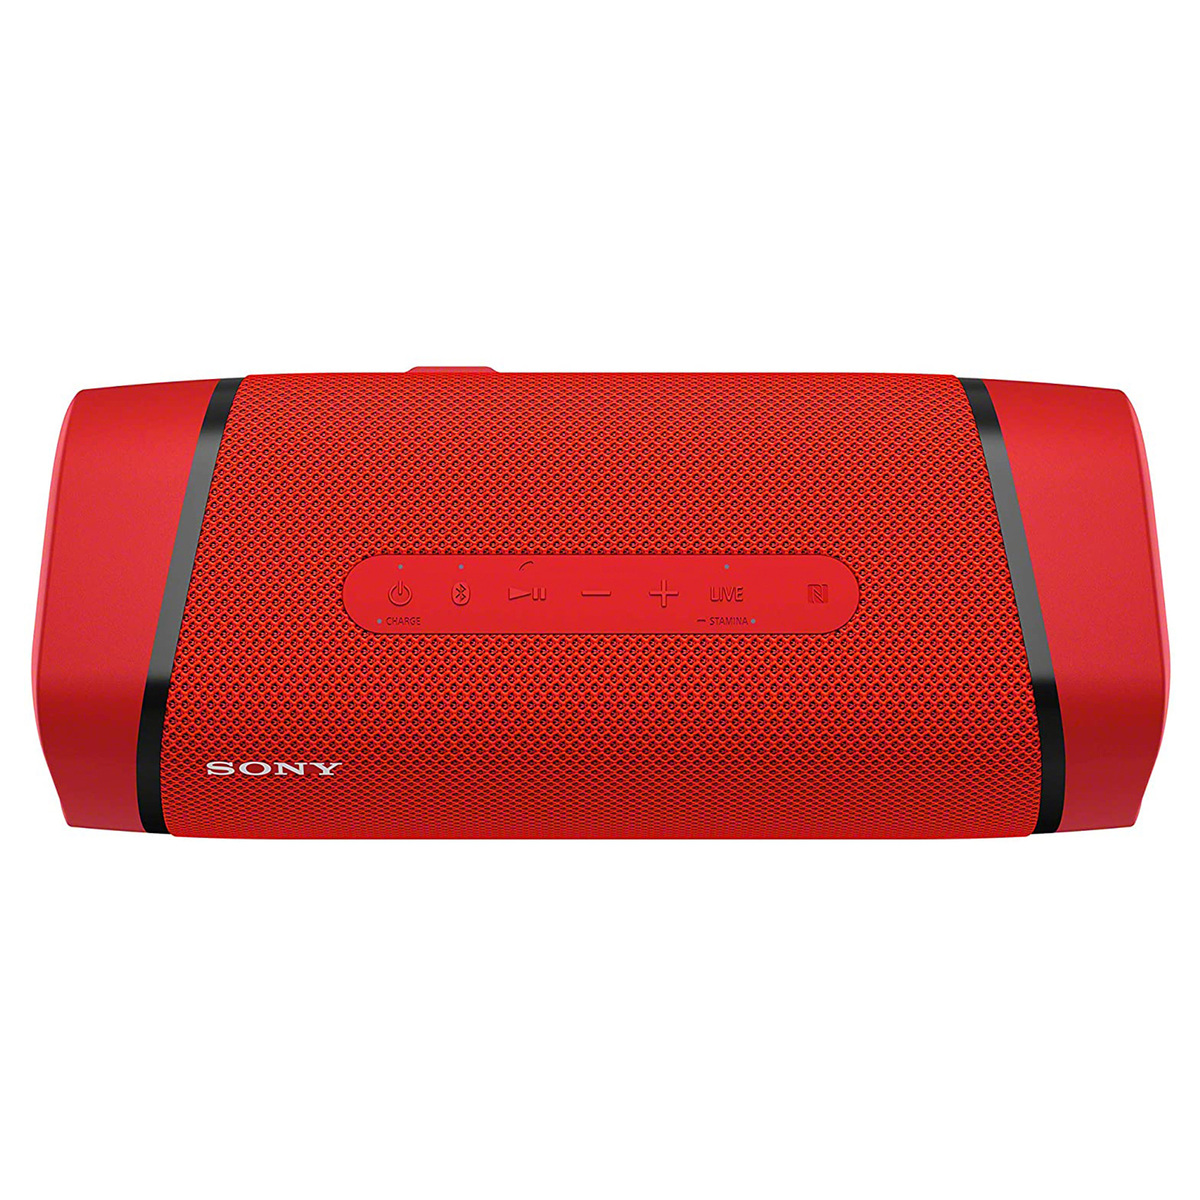 Sony SRS-XB33 EXTRA BASS Wireless Portable Speaker IP67 Waterproof Bluetooth and Built In Mic for Phone Calls, Red